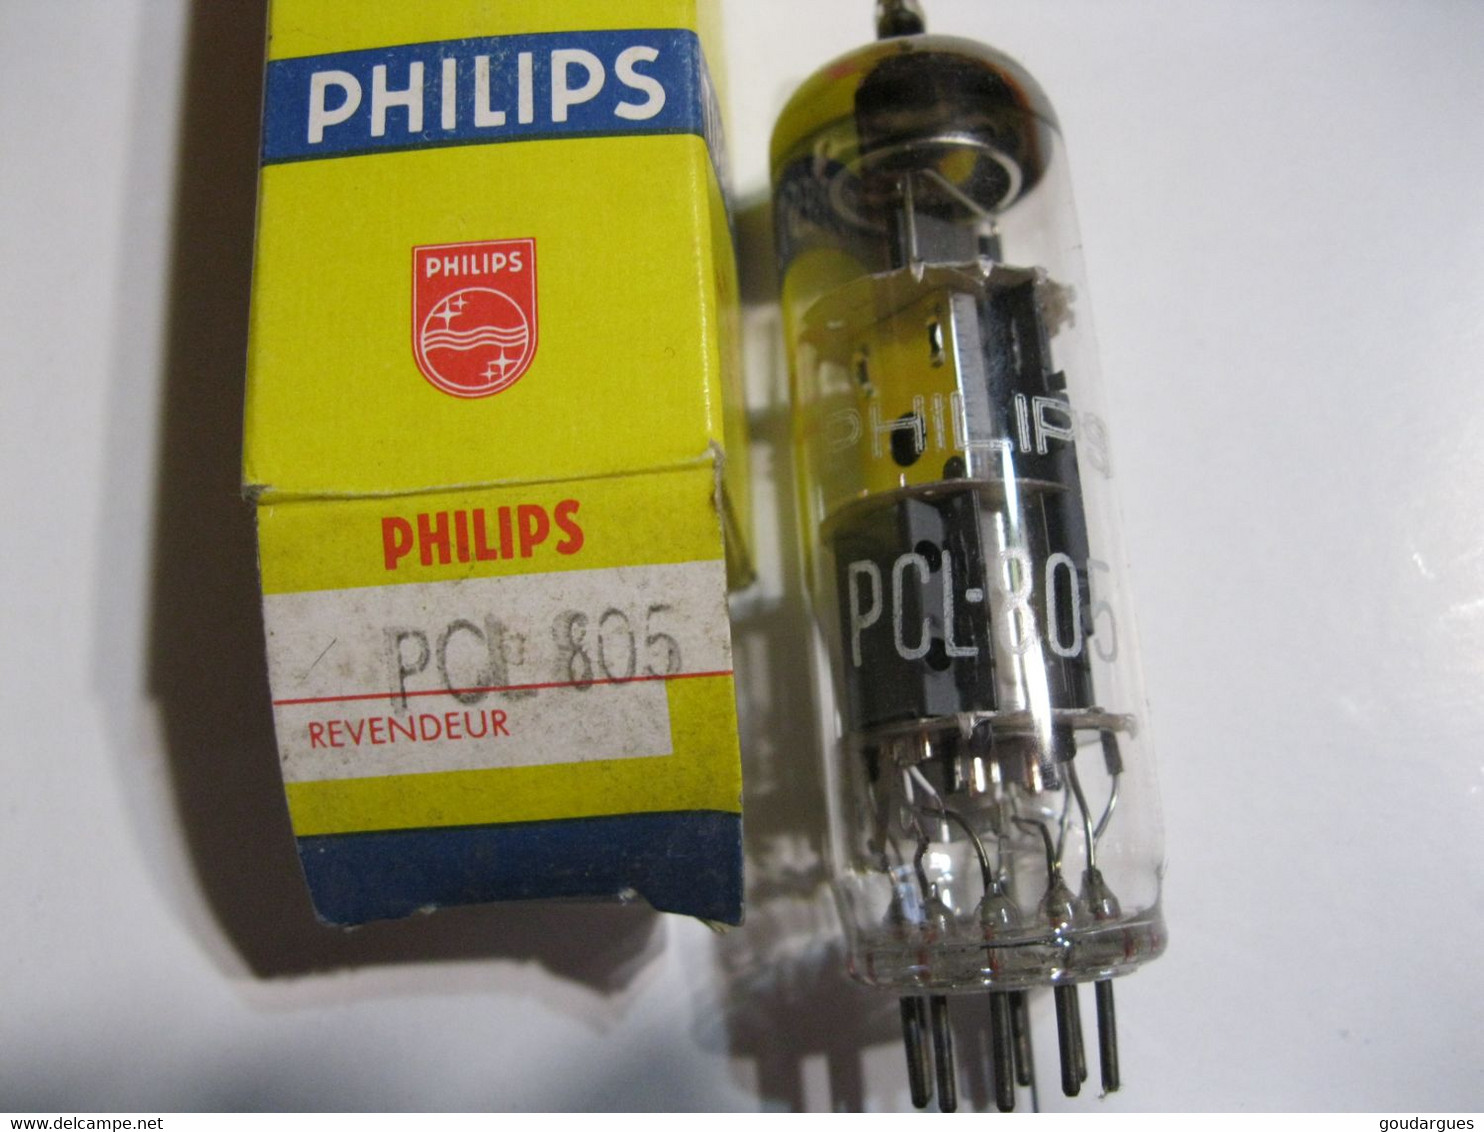 Tube TSF Philips PCL 805 - Tubes